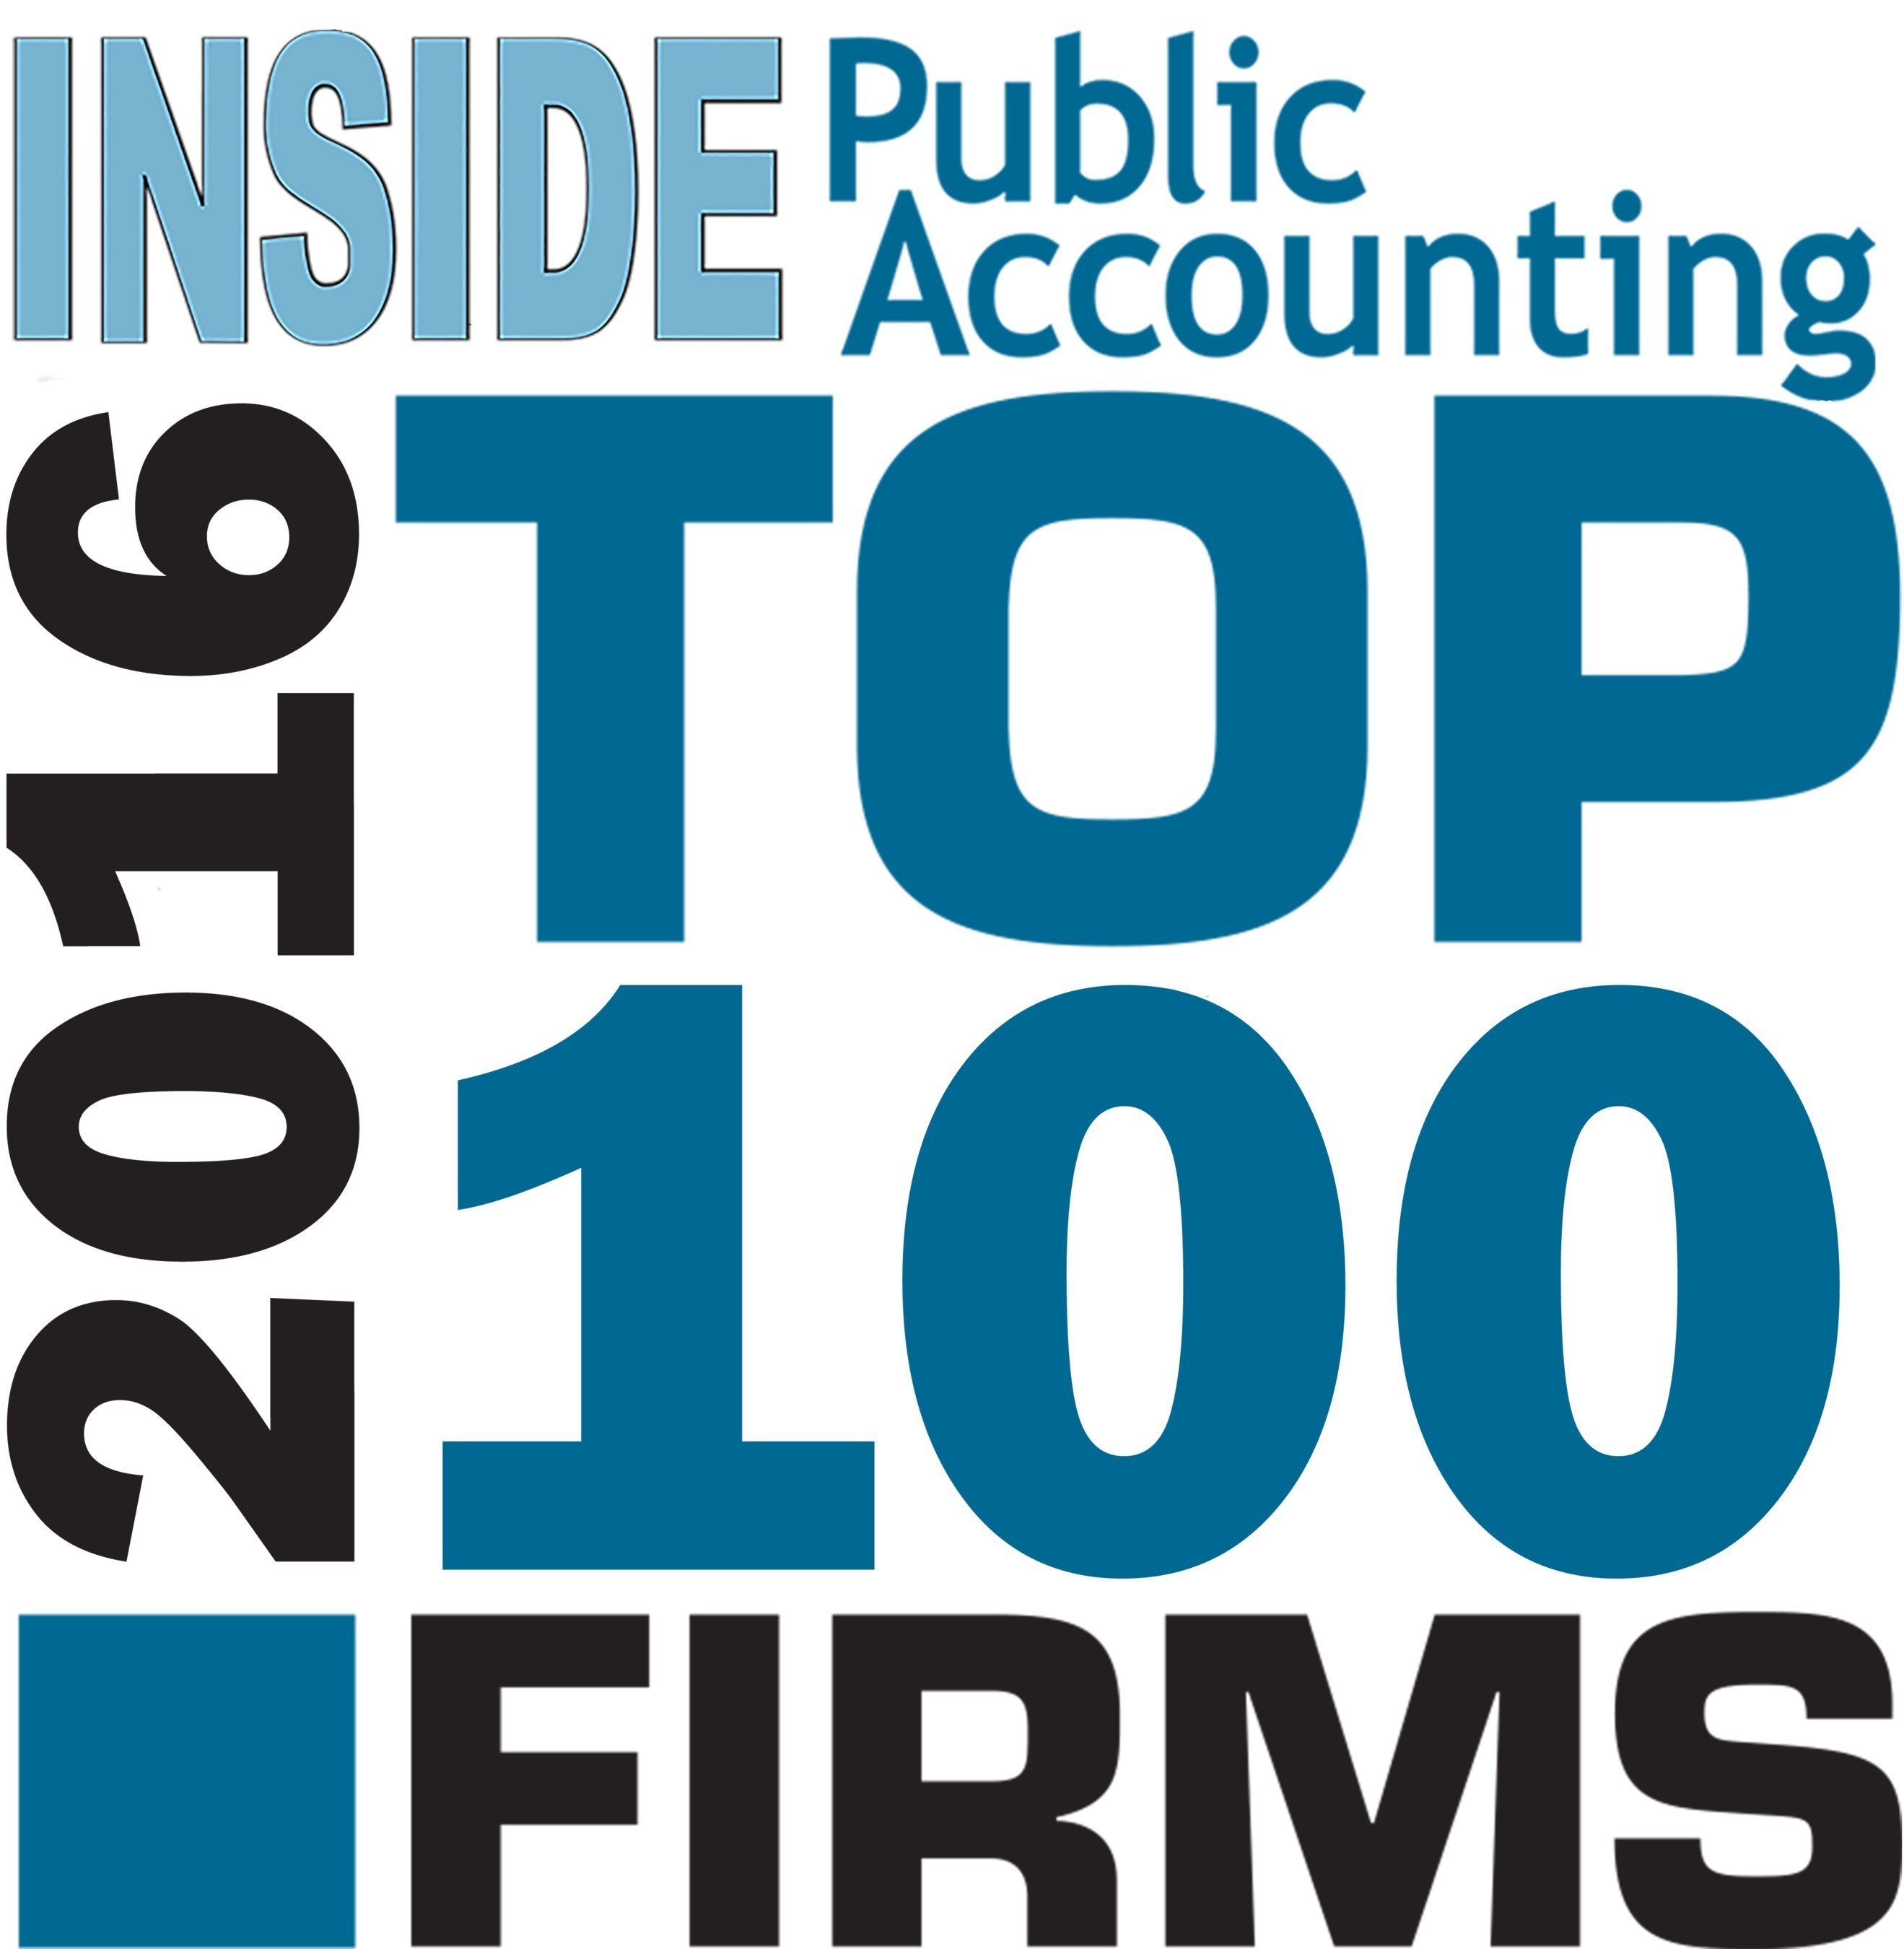 Siegfried Named 34th Largest and 6th Fastest-Growing CPA Firm in the United States